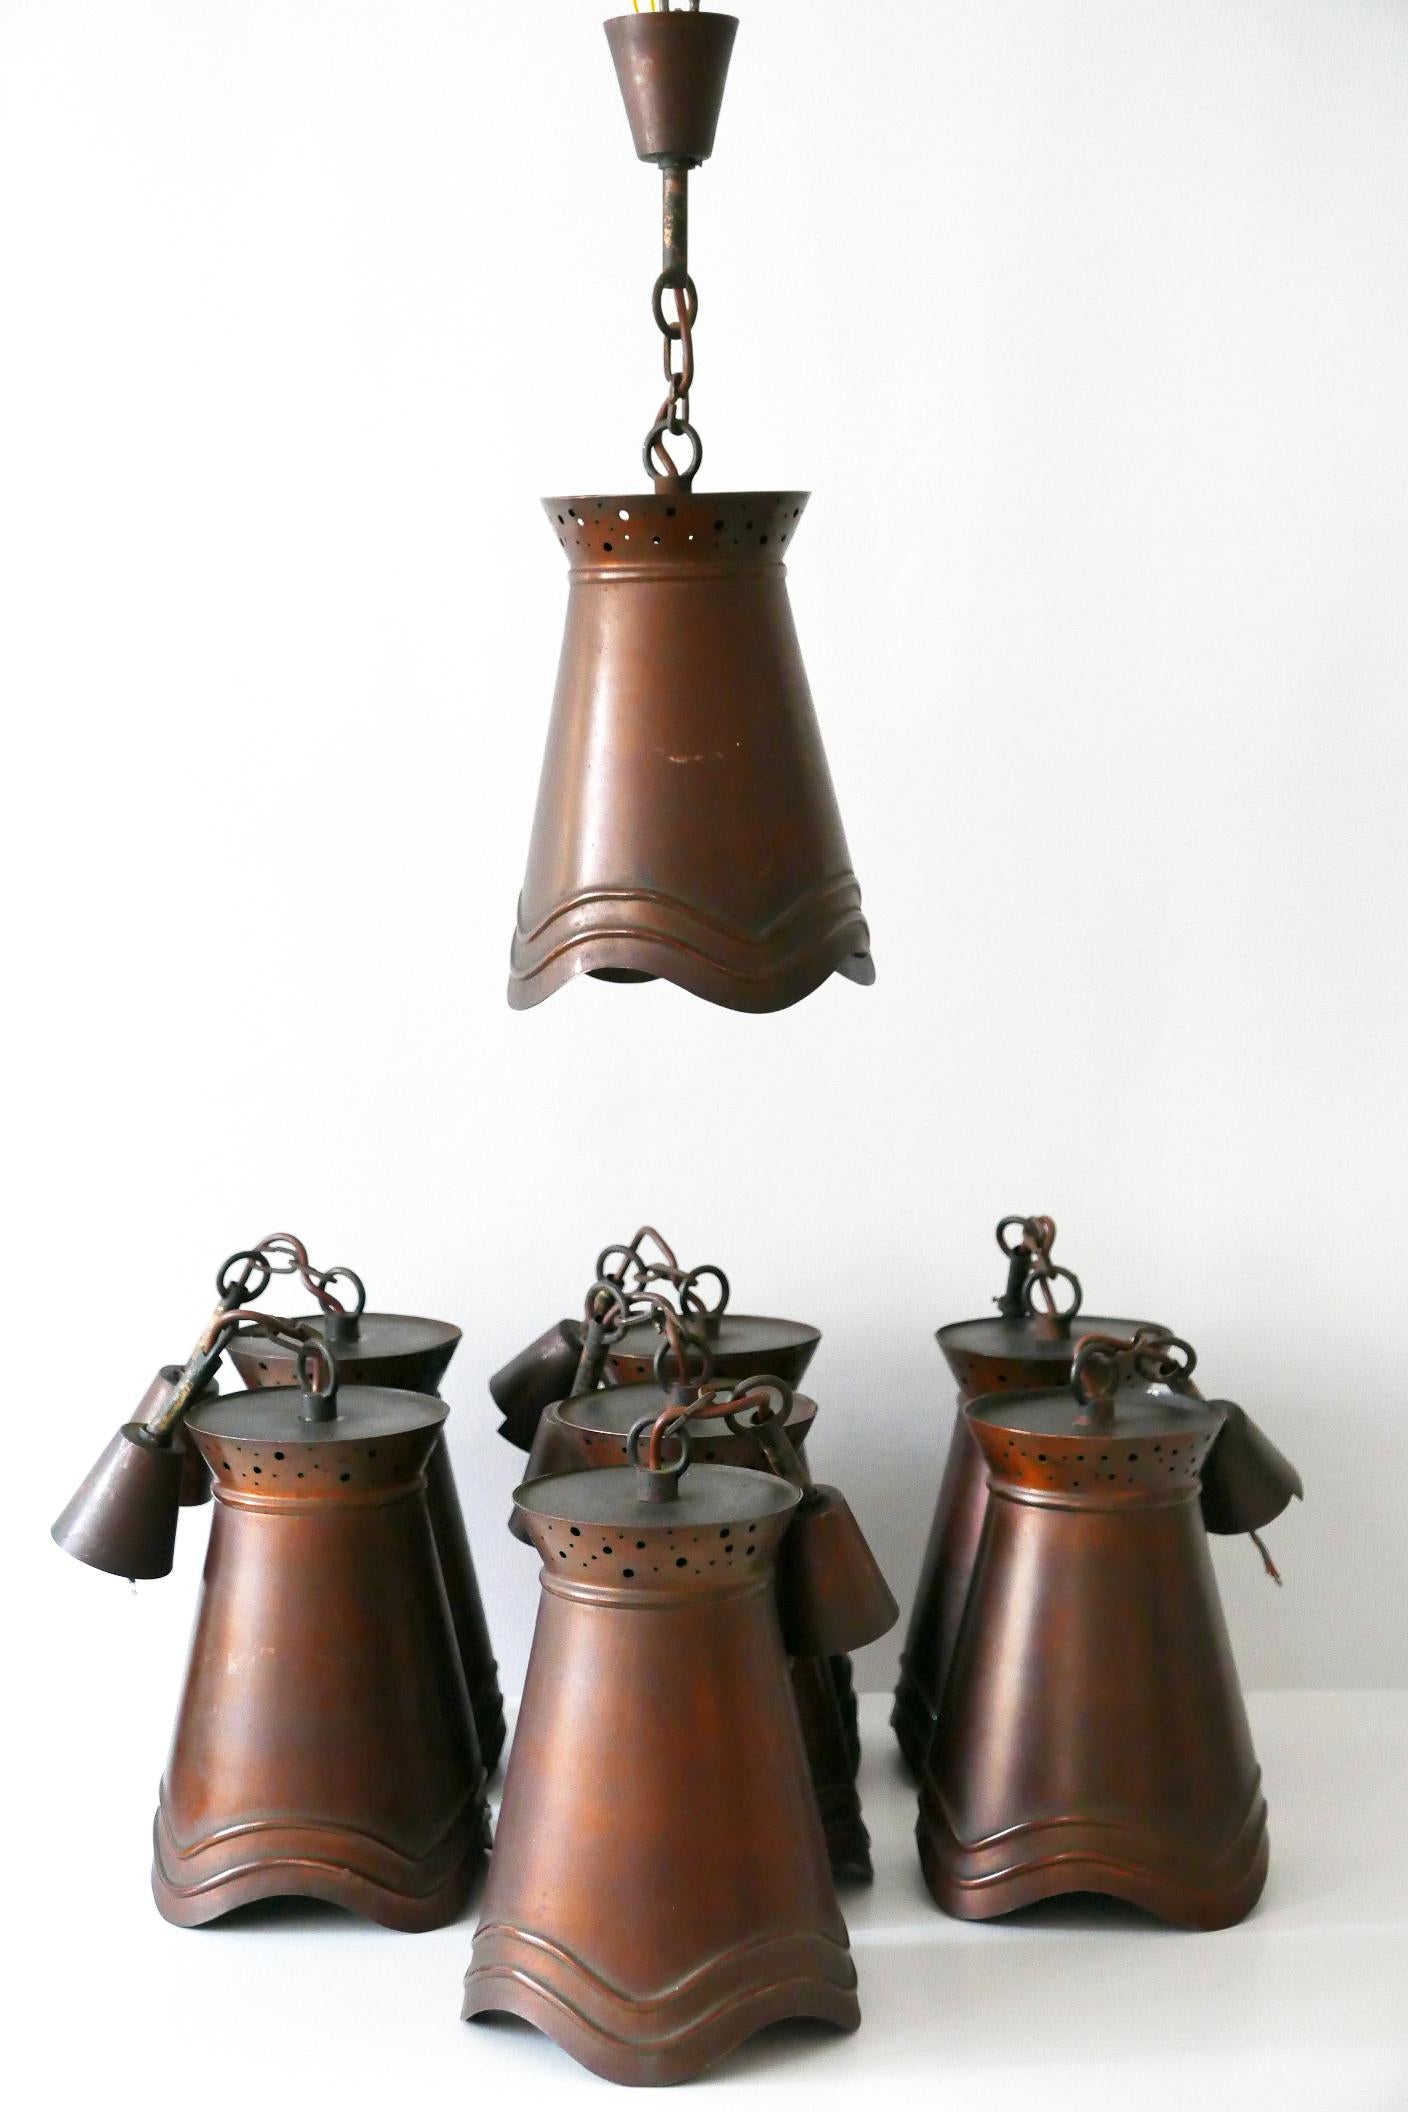 Rare and elegant Mid-Century Modern copper pendant lamps or hanging lights. Manufactured in Germany, circa 1950s.

Executed in copper, each lamp comes with 1 x E27 / E26 Edison screw fit bulb holder, is wired, and in working condition. It runs